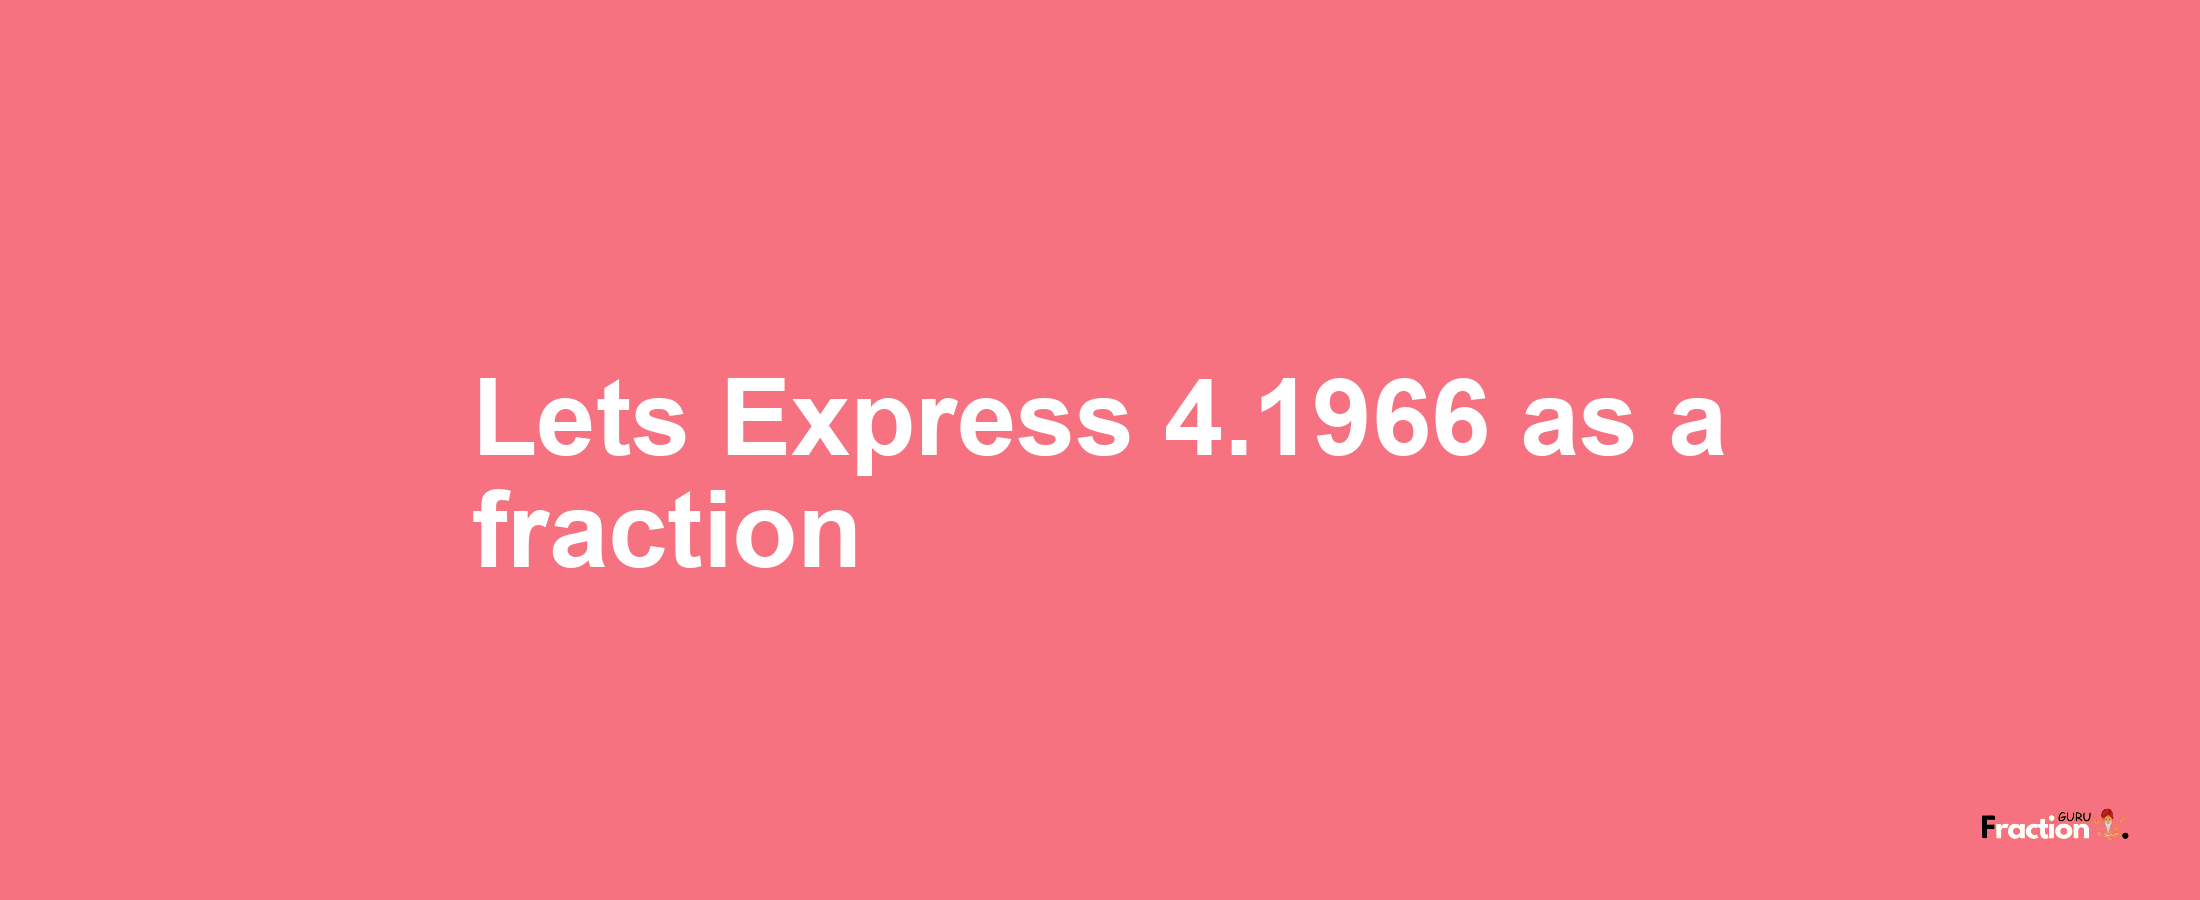 Lets Express 4.1966 as afraction